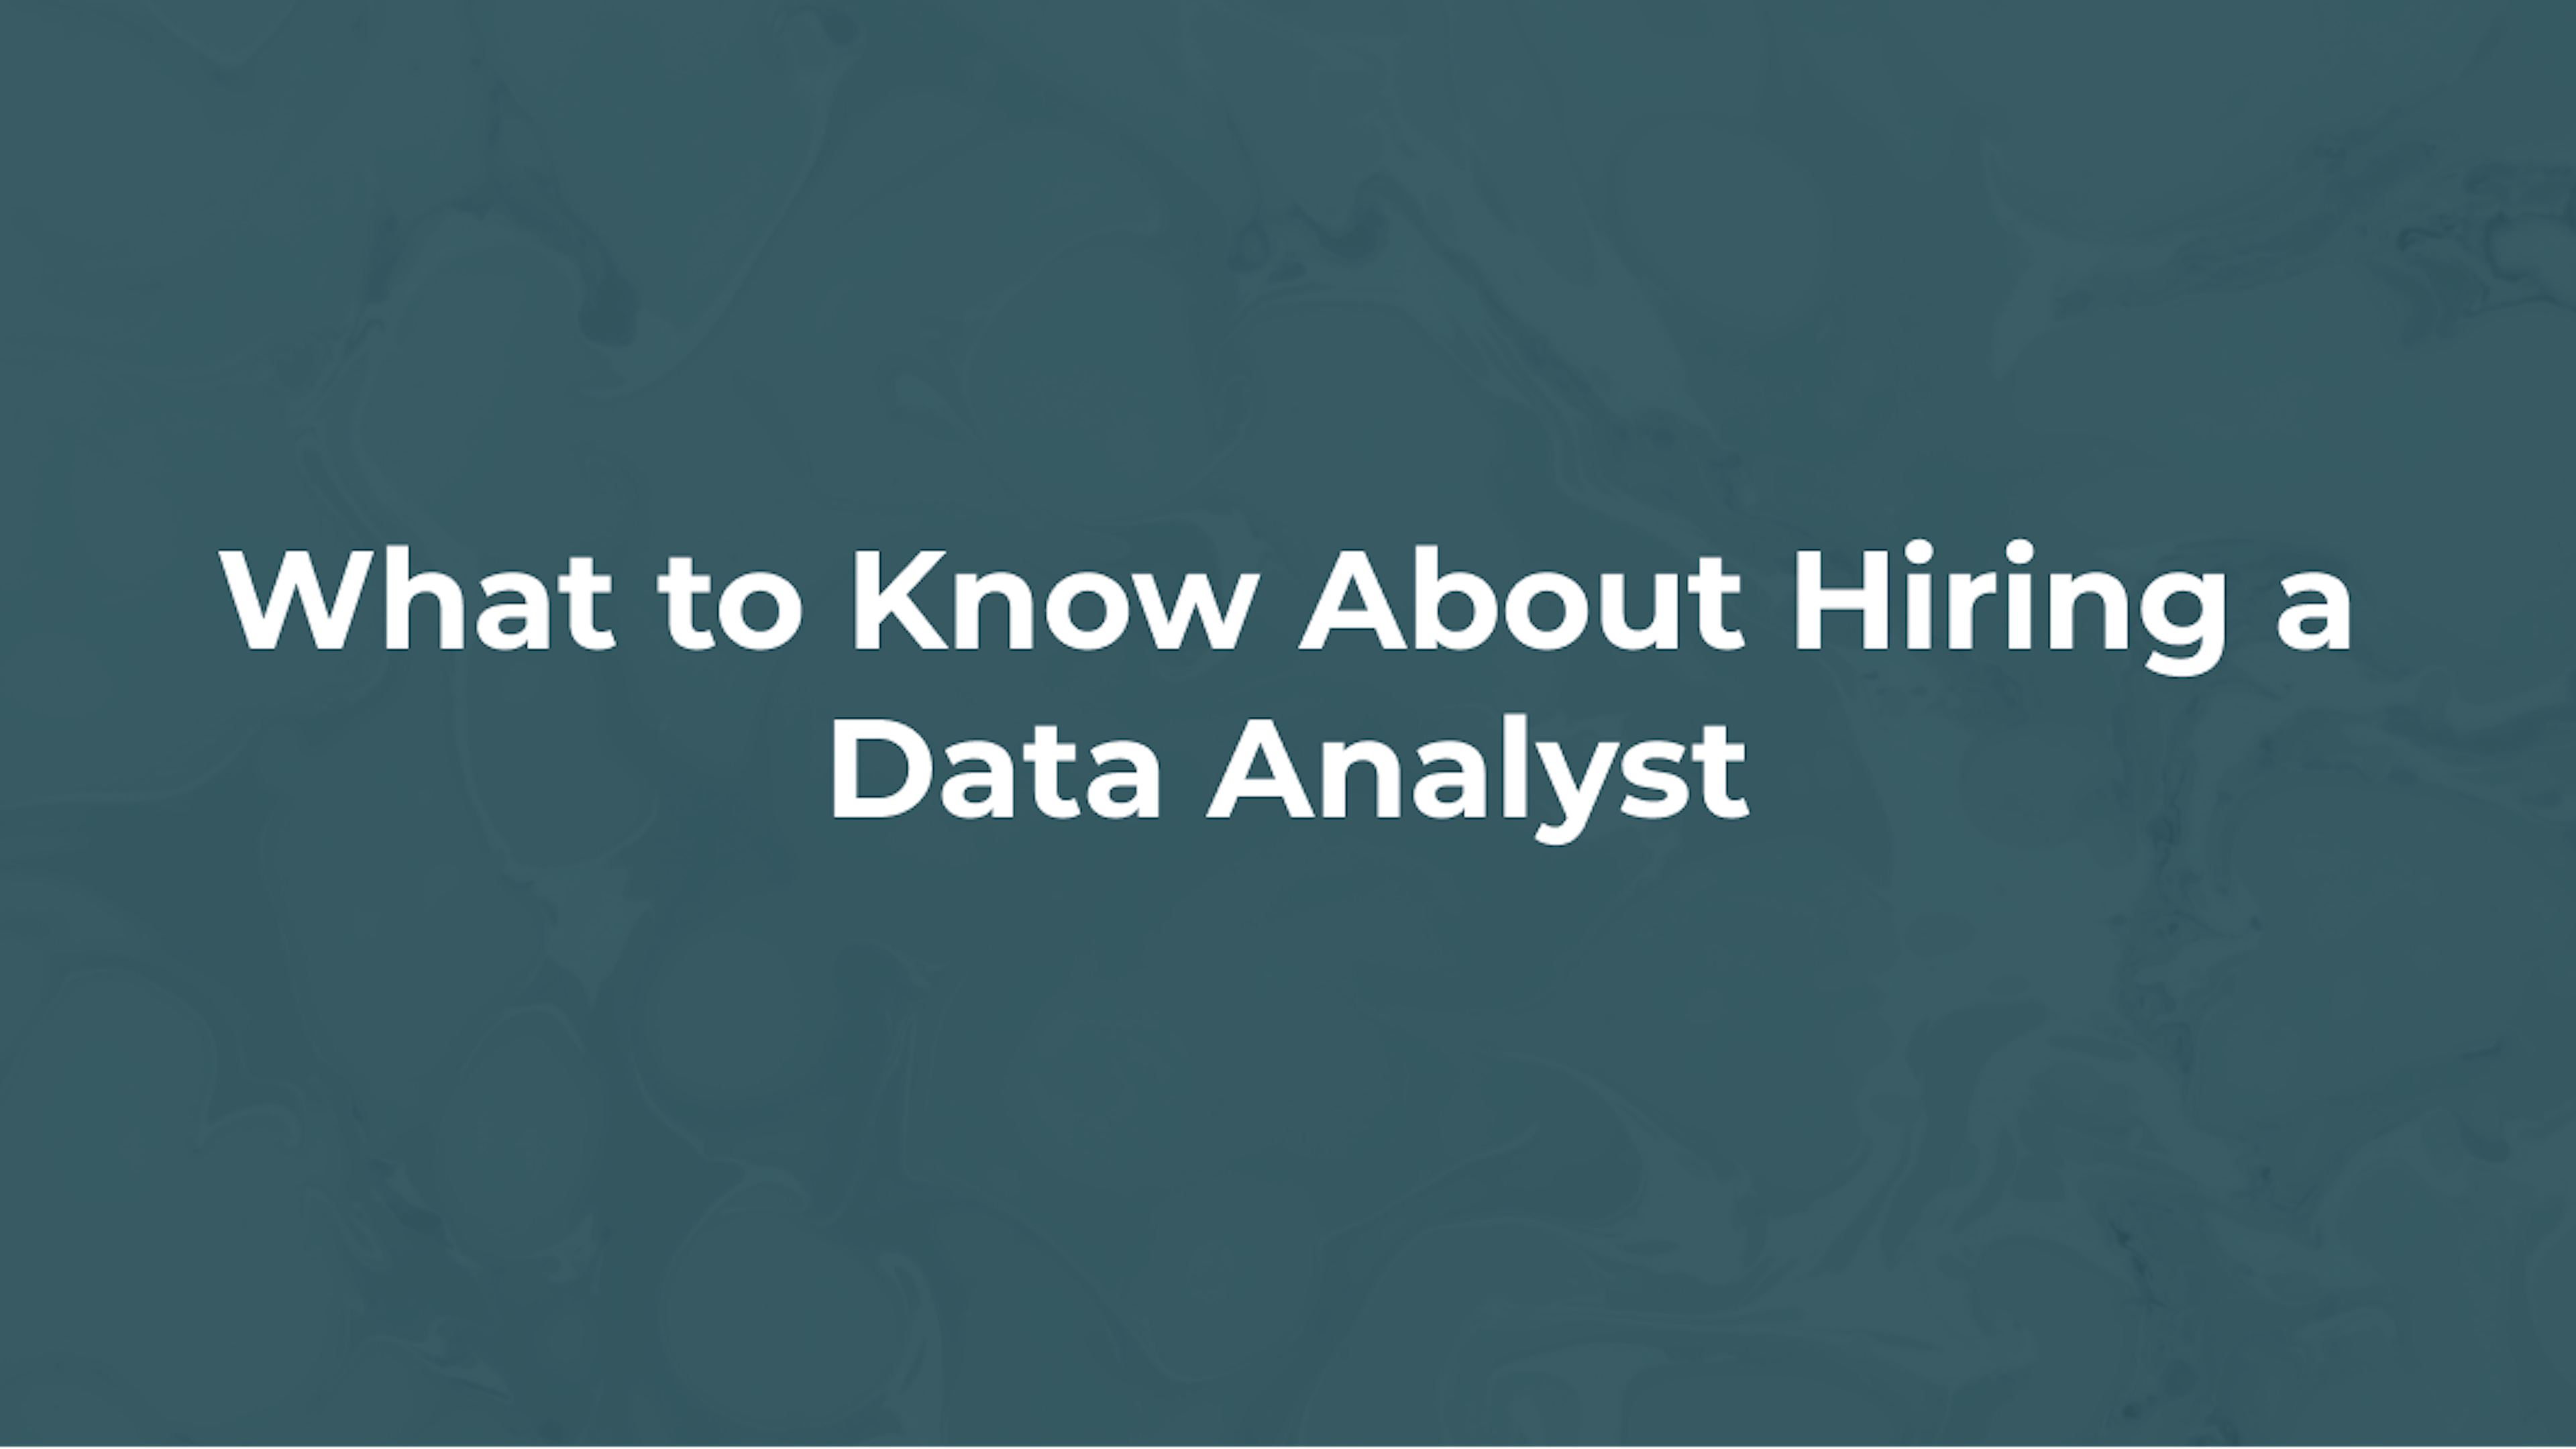 What to Know About Hiring a Data Analyst